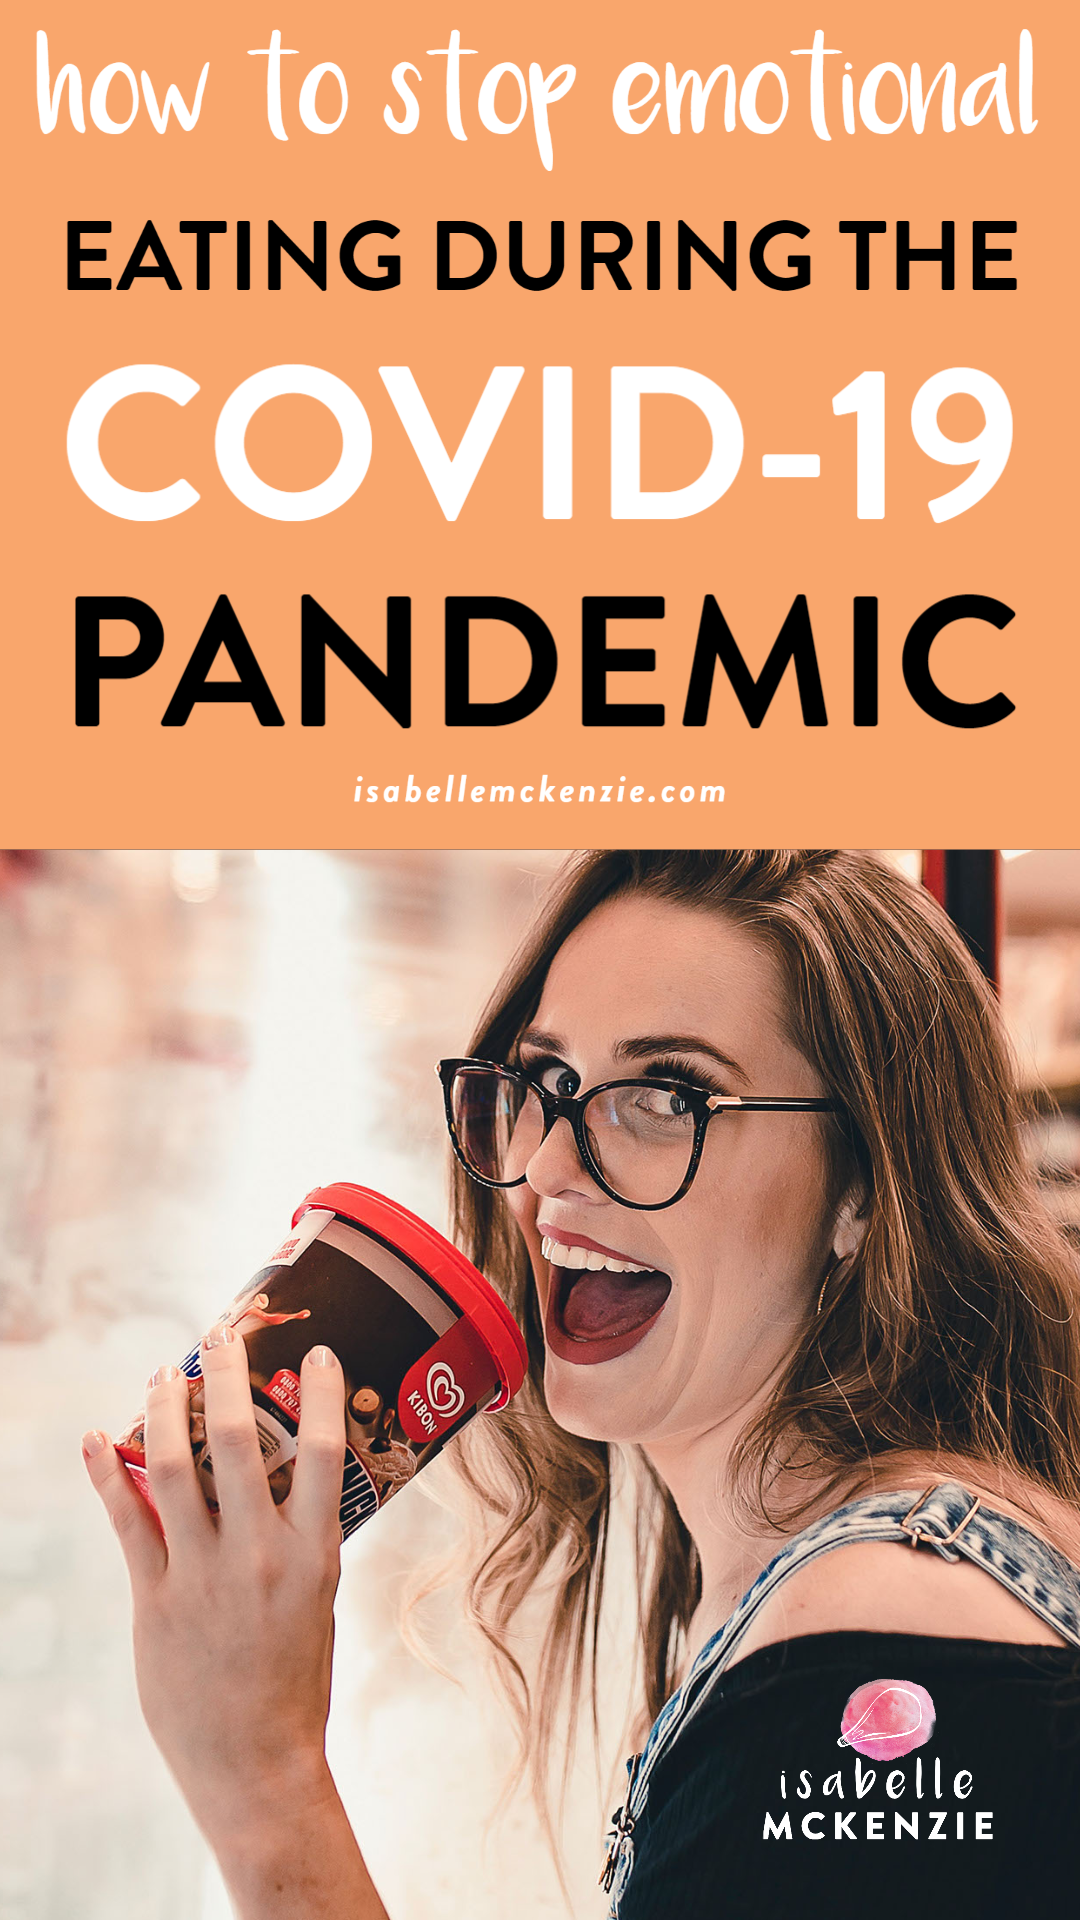 7 Ways To Curb Stress Eating During A Crisis - COVID-19 Pandemic